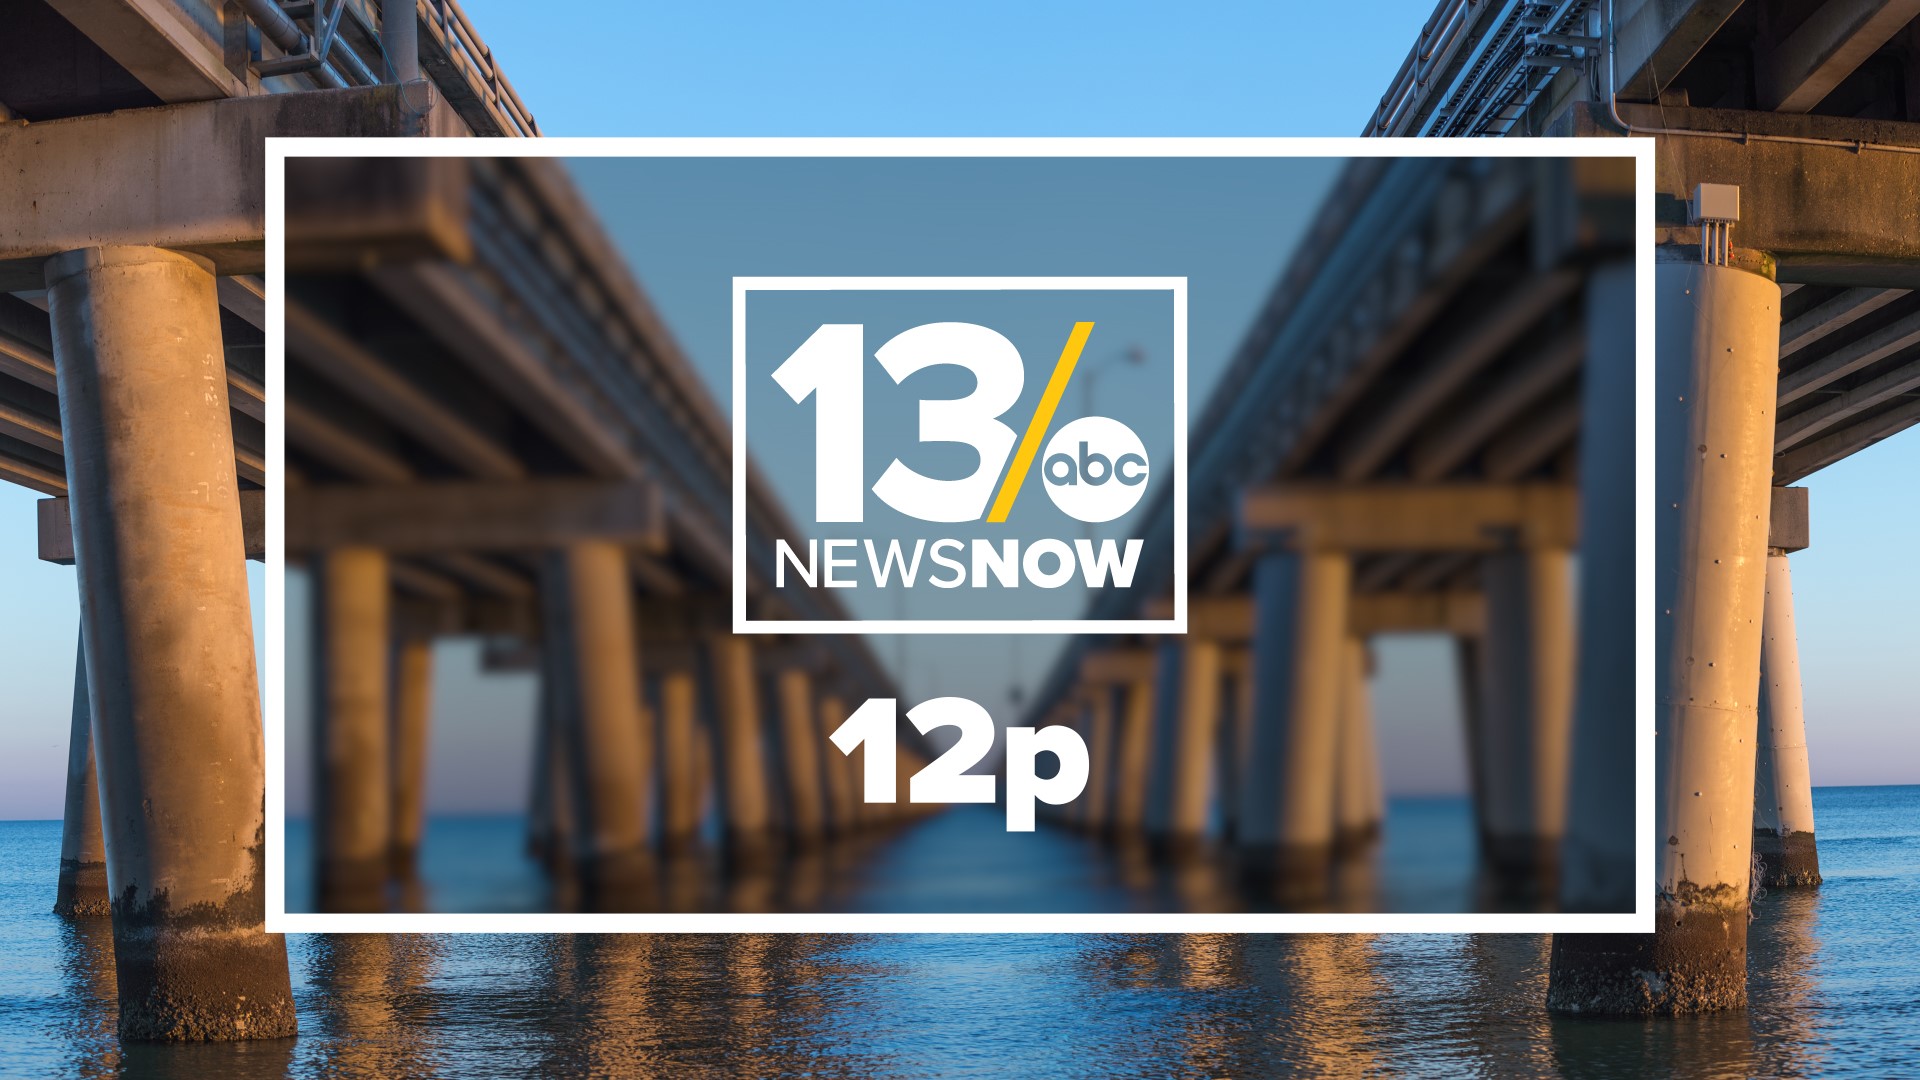 With a passion for storytelling, 13News Now brings you news, weather, sports, traffic, and more for the Hampton Roads and Eastern Shore areas of Virginia.